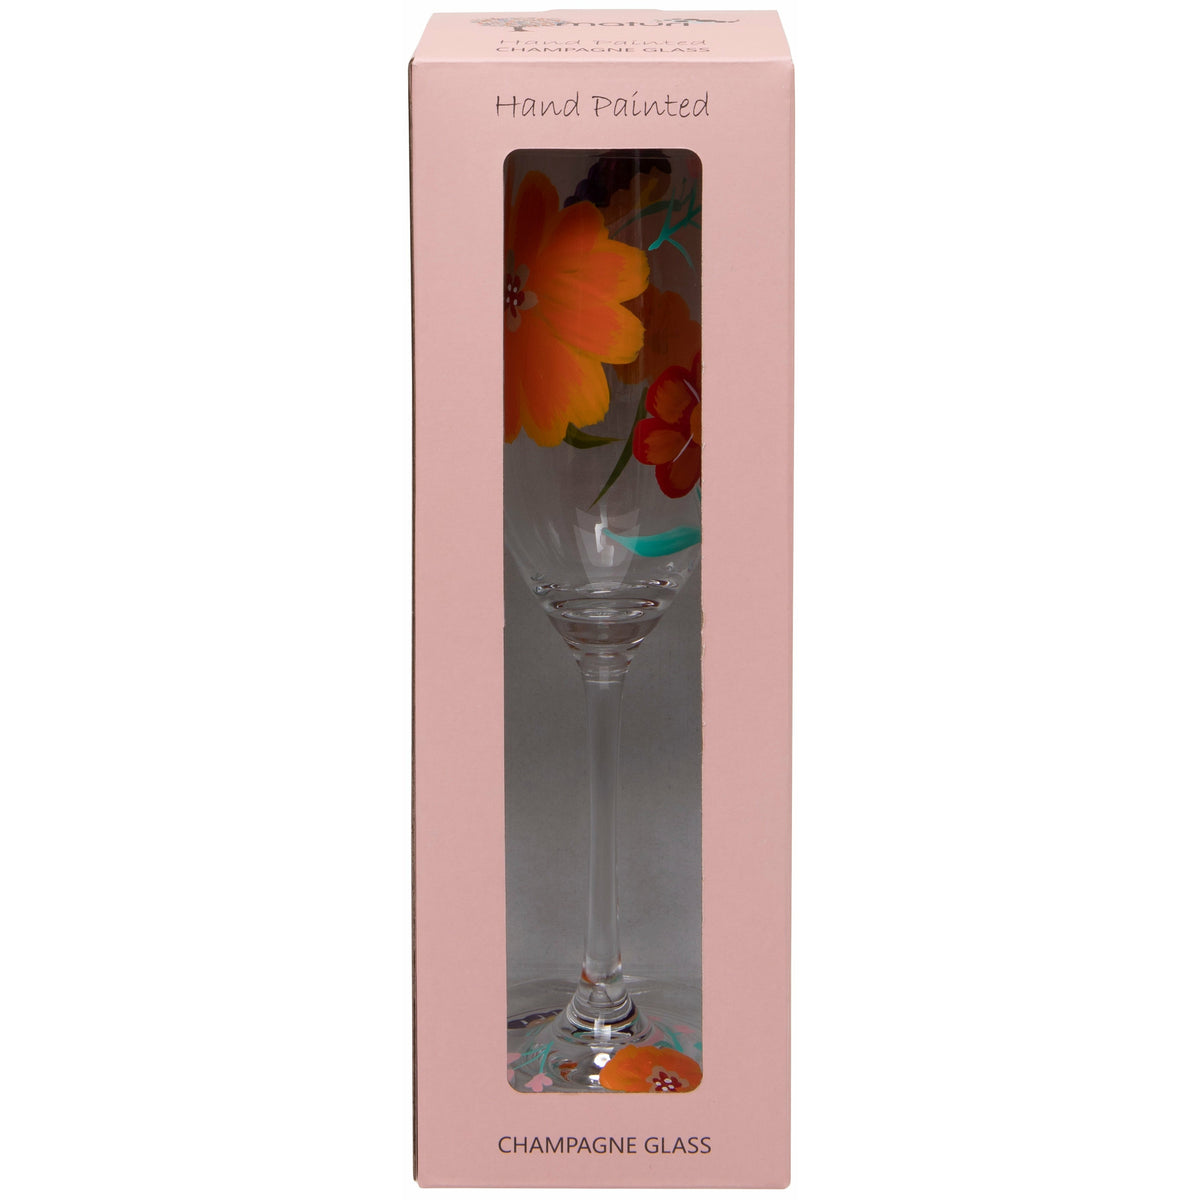 Hand Painted Flowers Champagne Flute in Box